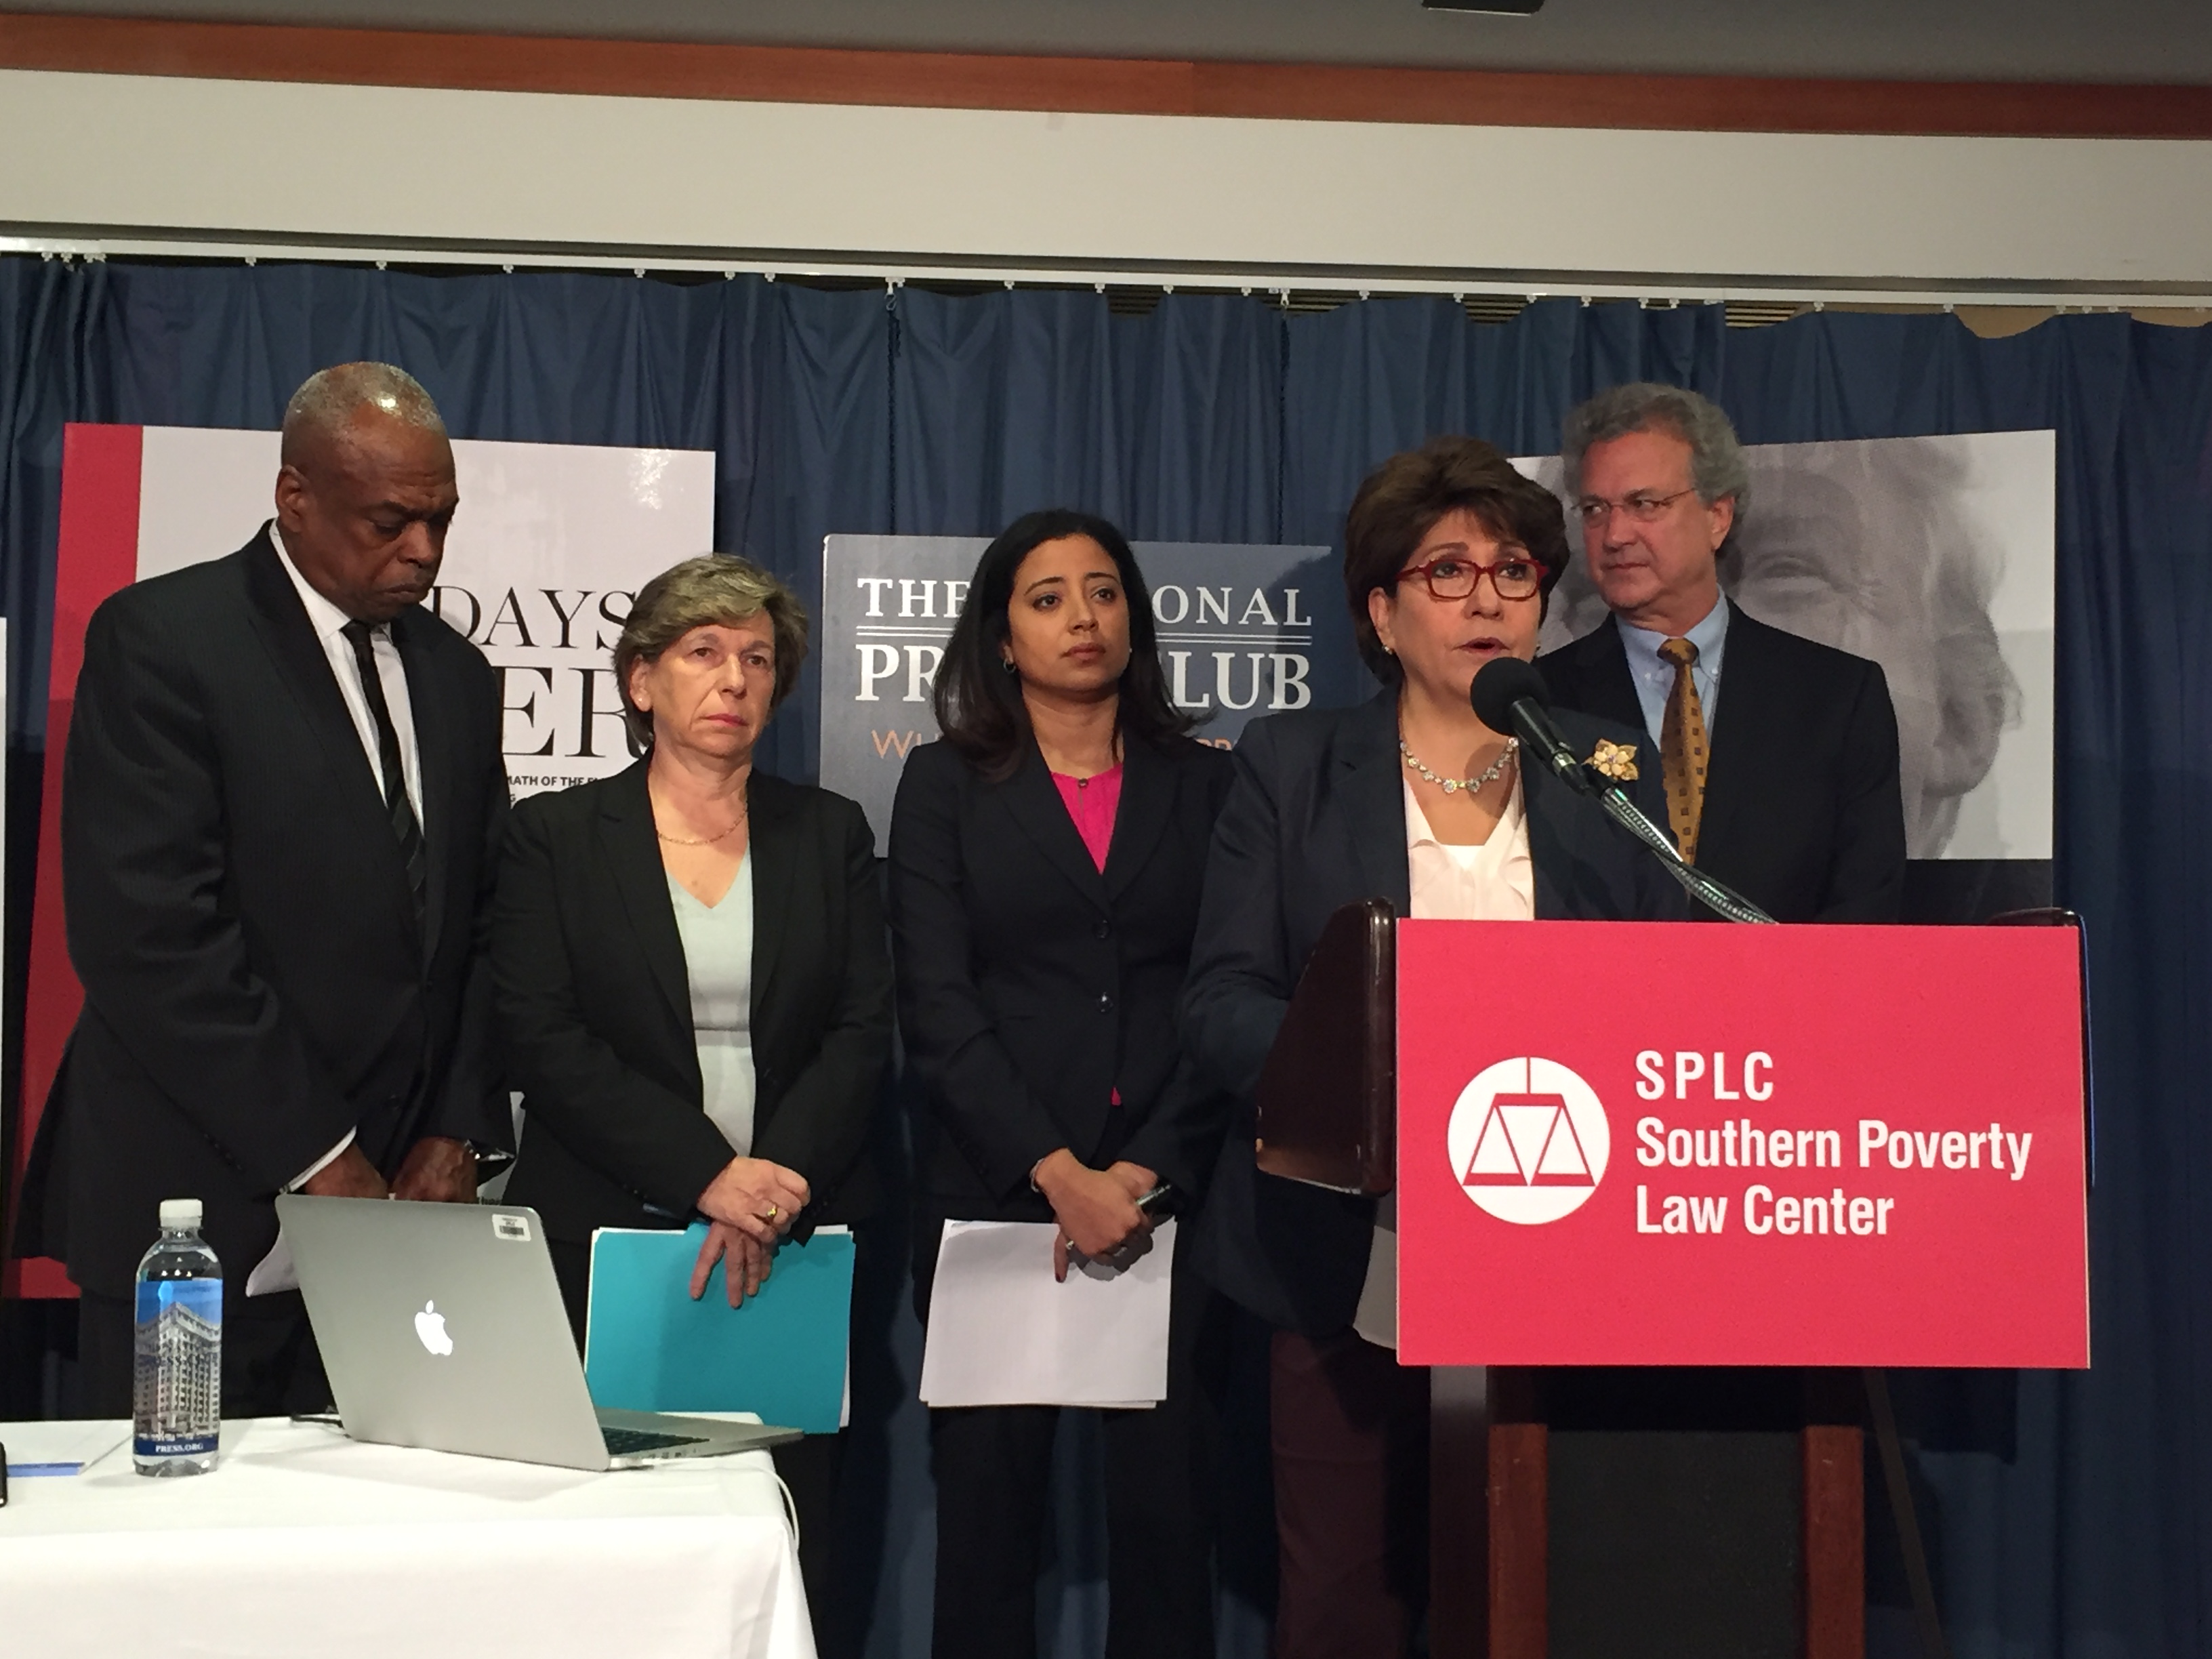 From left: Wade Henderson, The Leadership Conference on Civil and Human Rights; Randi Weingarten, American Federation of Teachers; Brenda Abdelall, Muslim Advocates; Richard Cohen, Southern Poverty Law Center. At podium: Janet Murguía, NCLR.